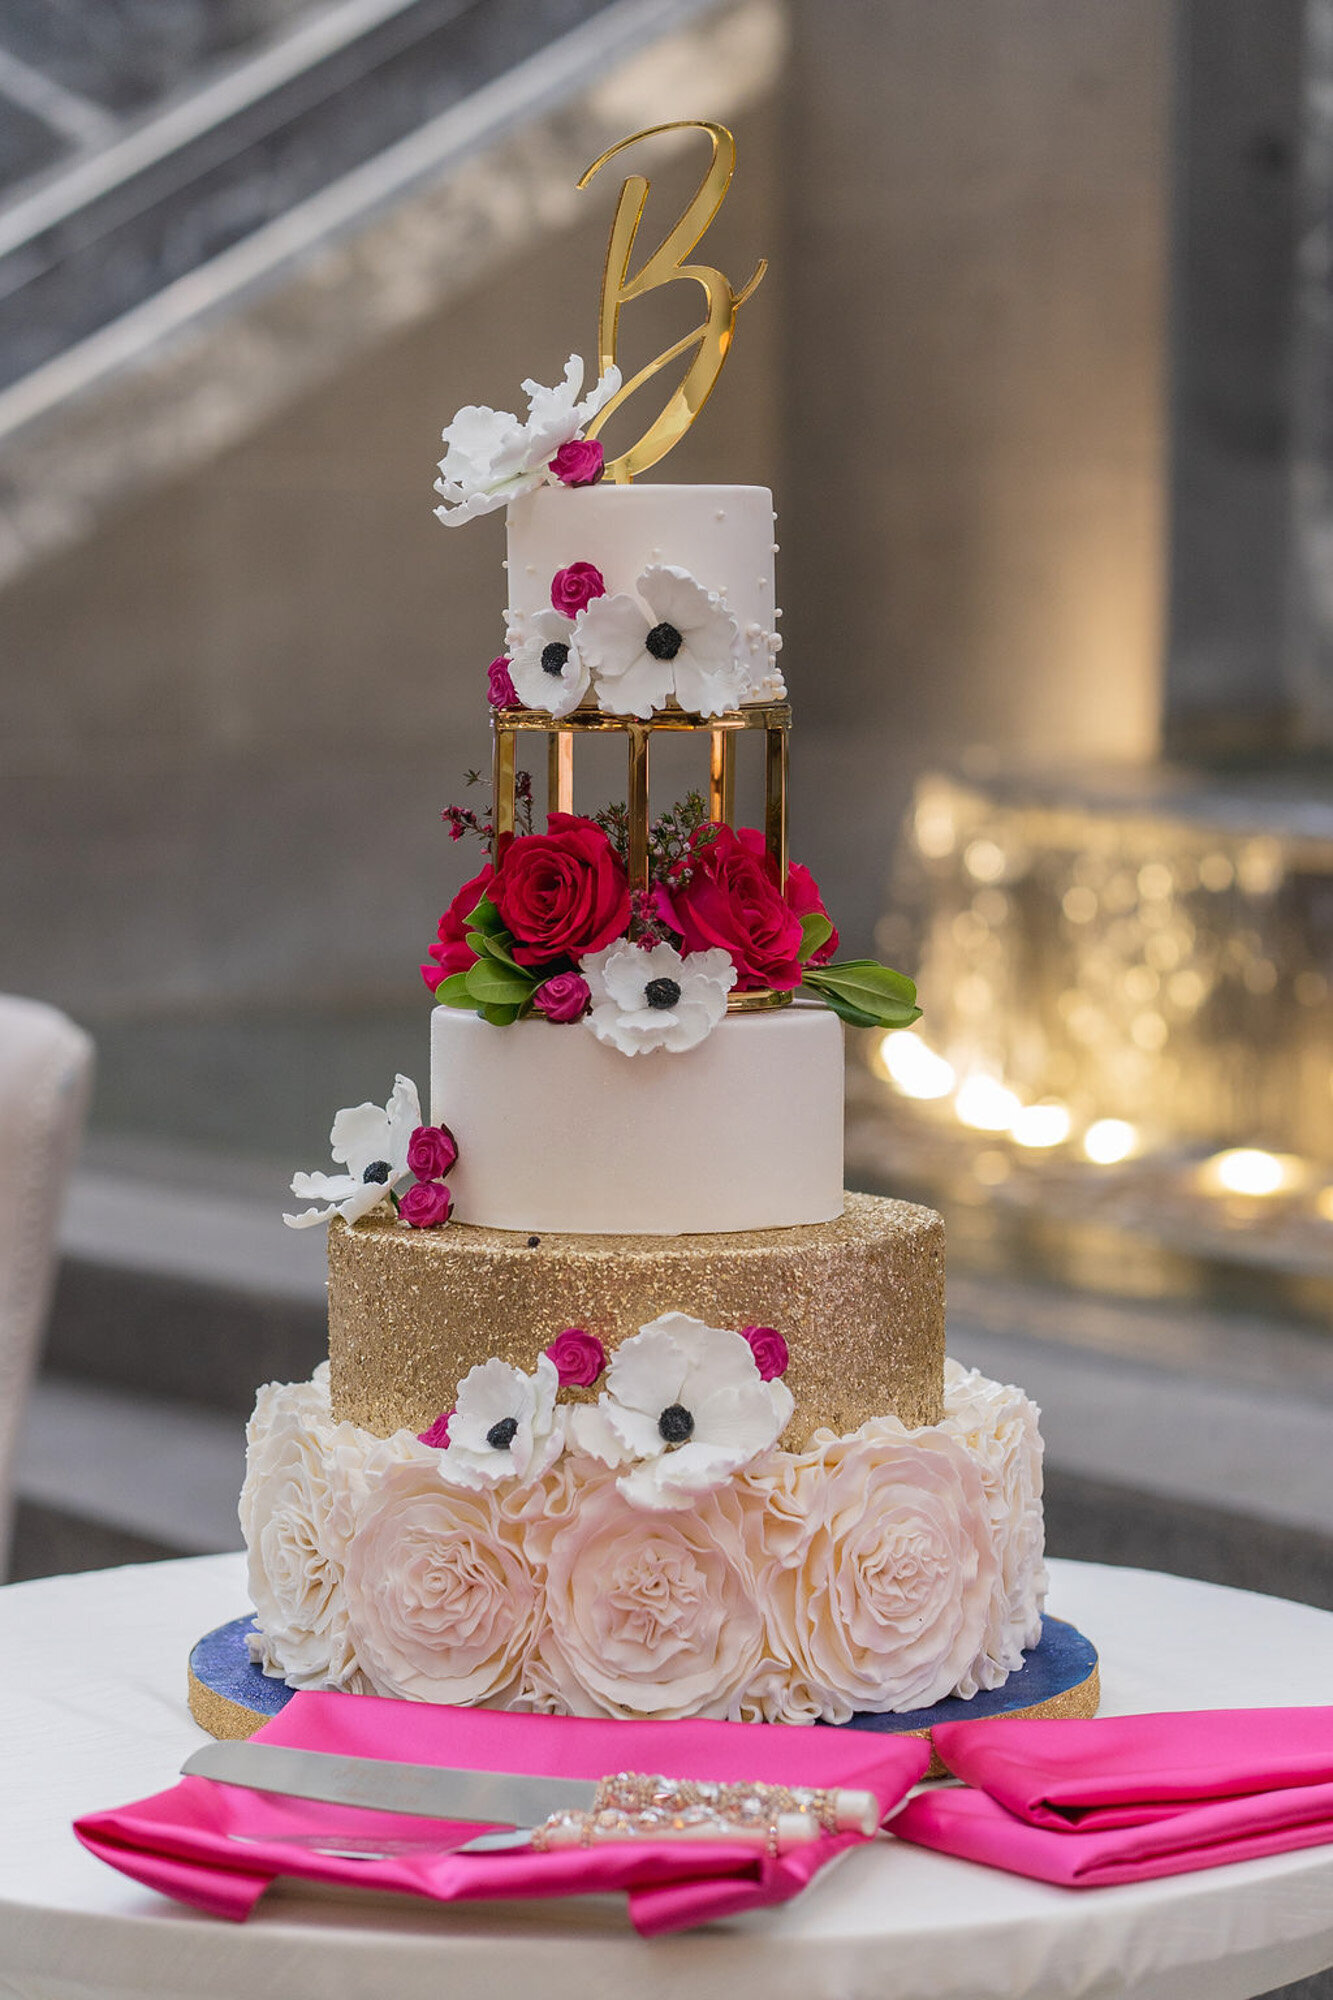 luxury wedding tier cake at wedding reception with gold and pink details